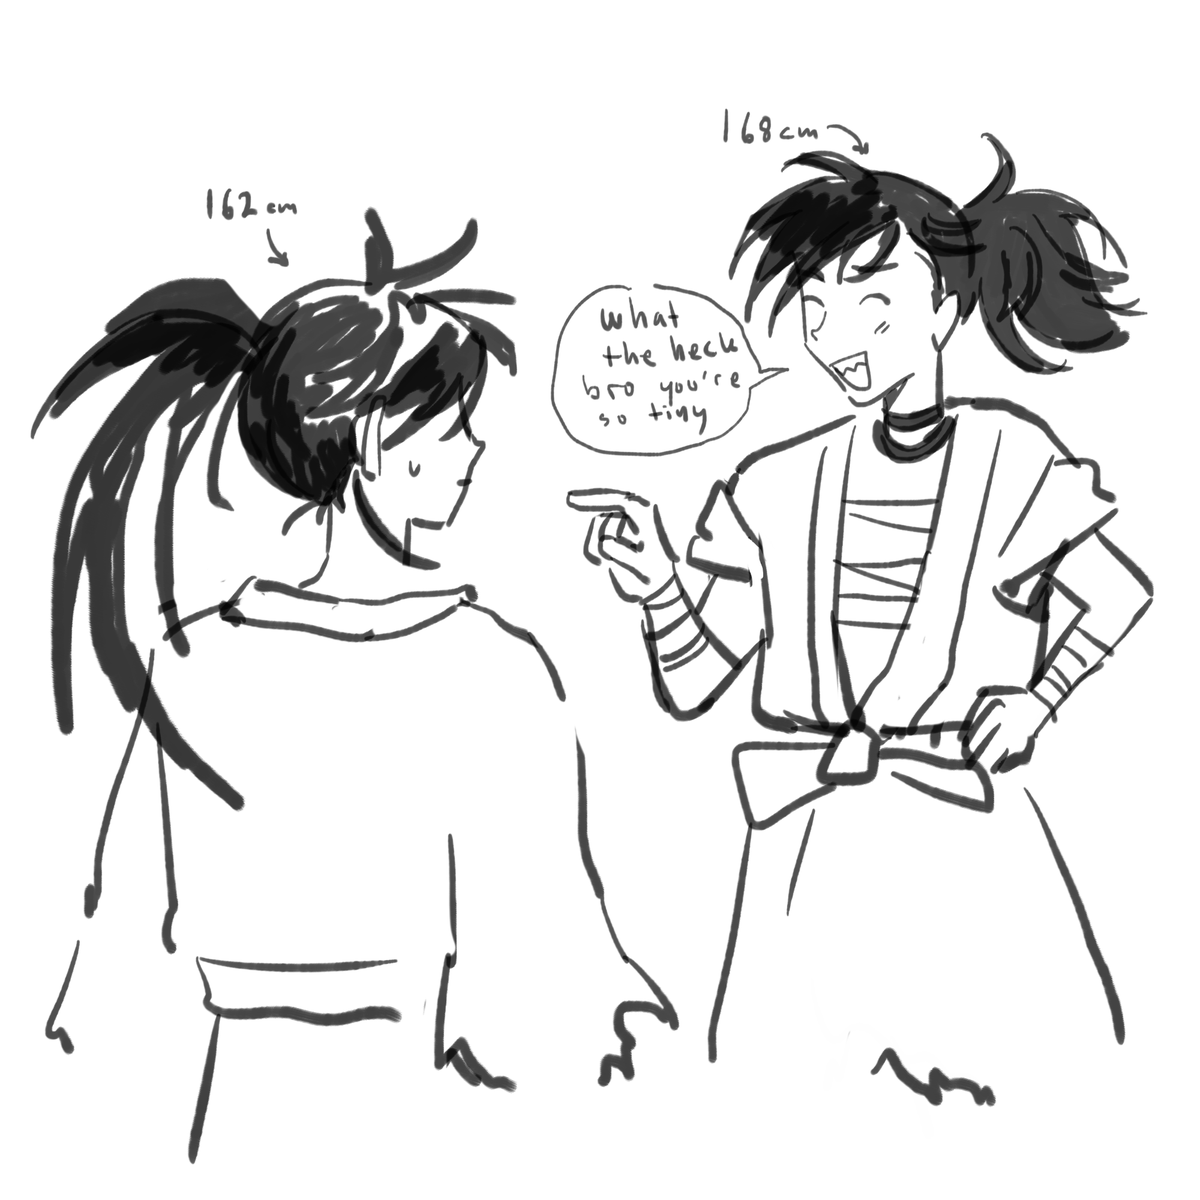 old dororo content i never posted <3 